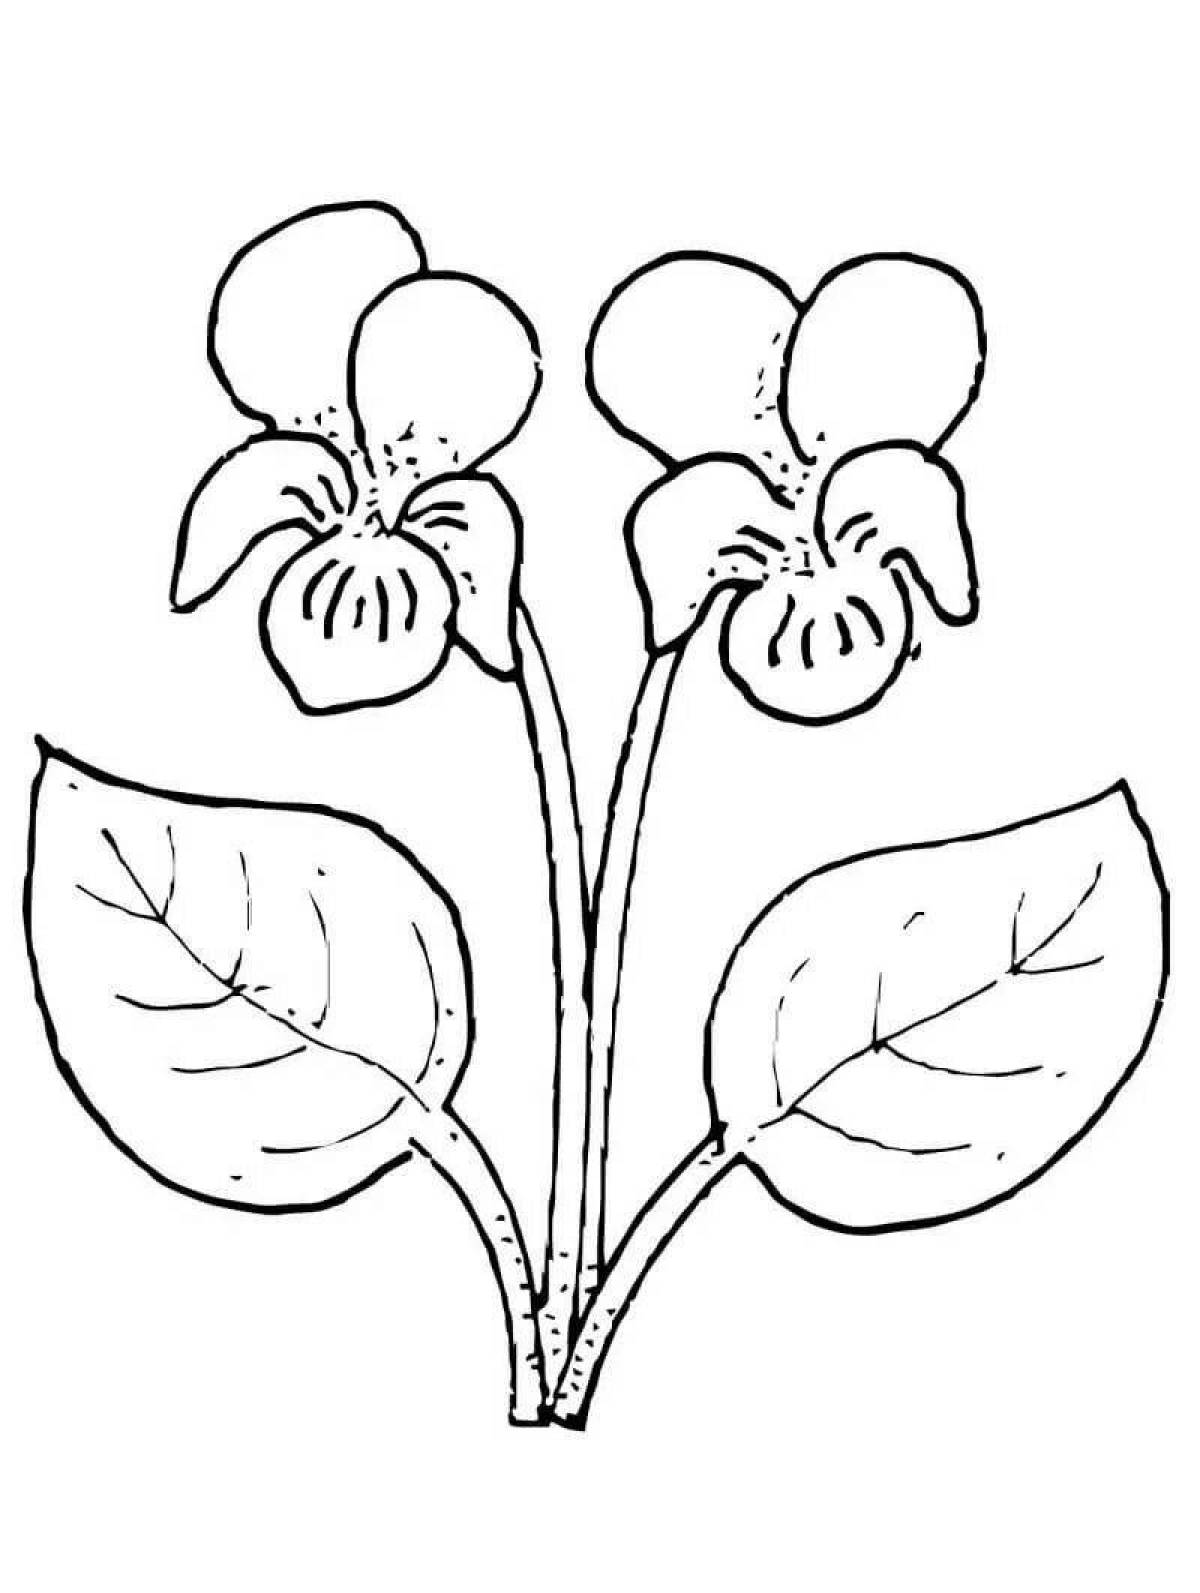 Coloring page shining purple flower